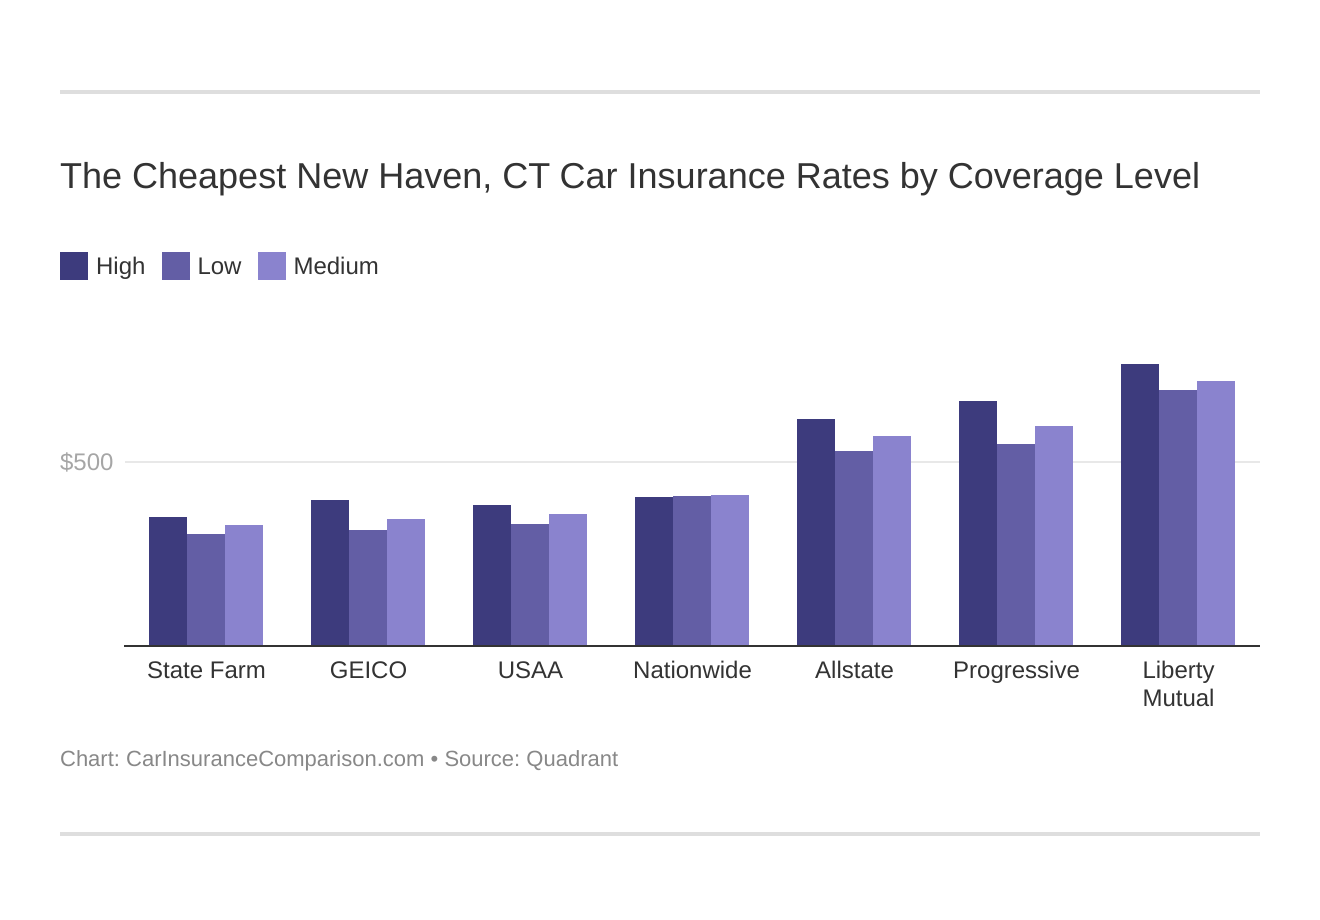 The Cheapest New Haven, CT Car Insurance Rates by Coverage Level